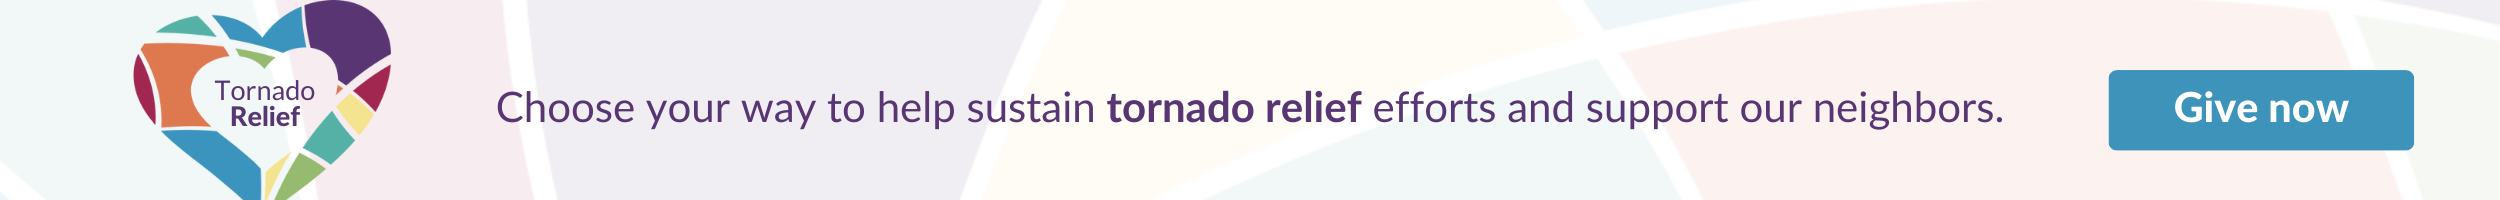 Choose your way to help sustain tornado relief efforts and support our neighbors